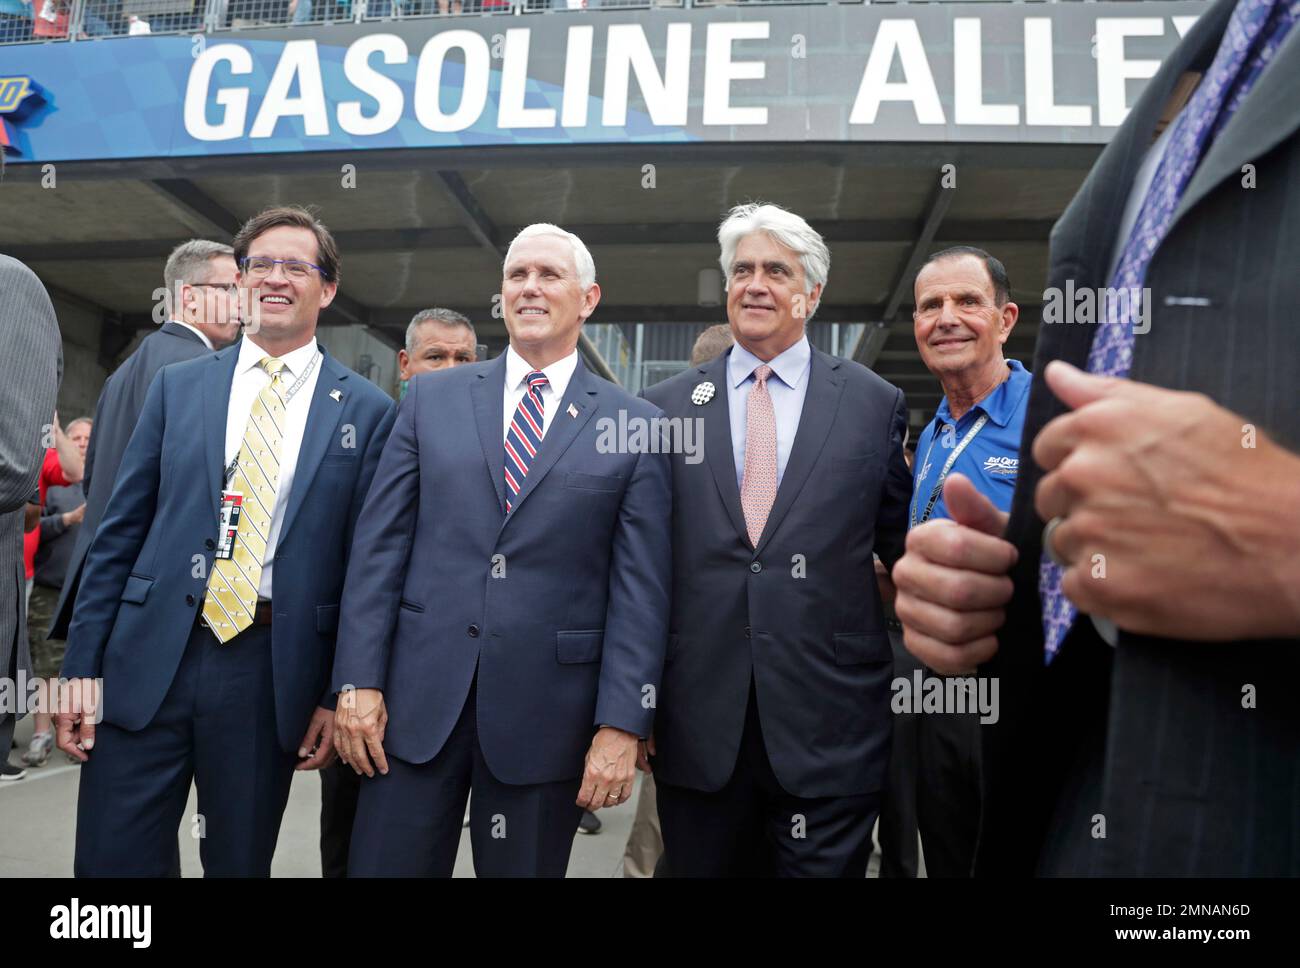 Vice President Mike Pence, second from left, poses for a photo with Doug Boles, Mark Miles and Bob Hillis under the Gasoline Alley sign during a practice session for the IndyCar Indianapolis 500 auto race at Indianapolis Motor Speedway, in Indianapolis Friday, May 18, 2018. (AP Photo/Michael Conroy) Stock Photo